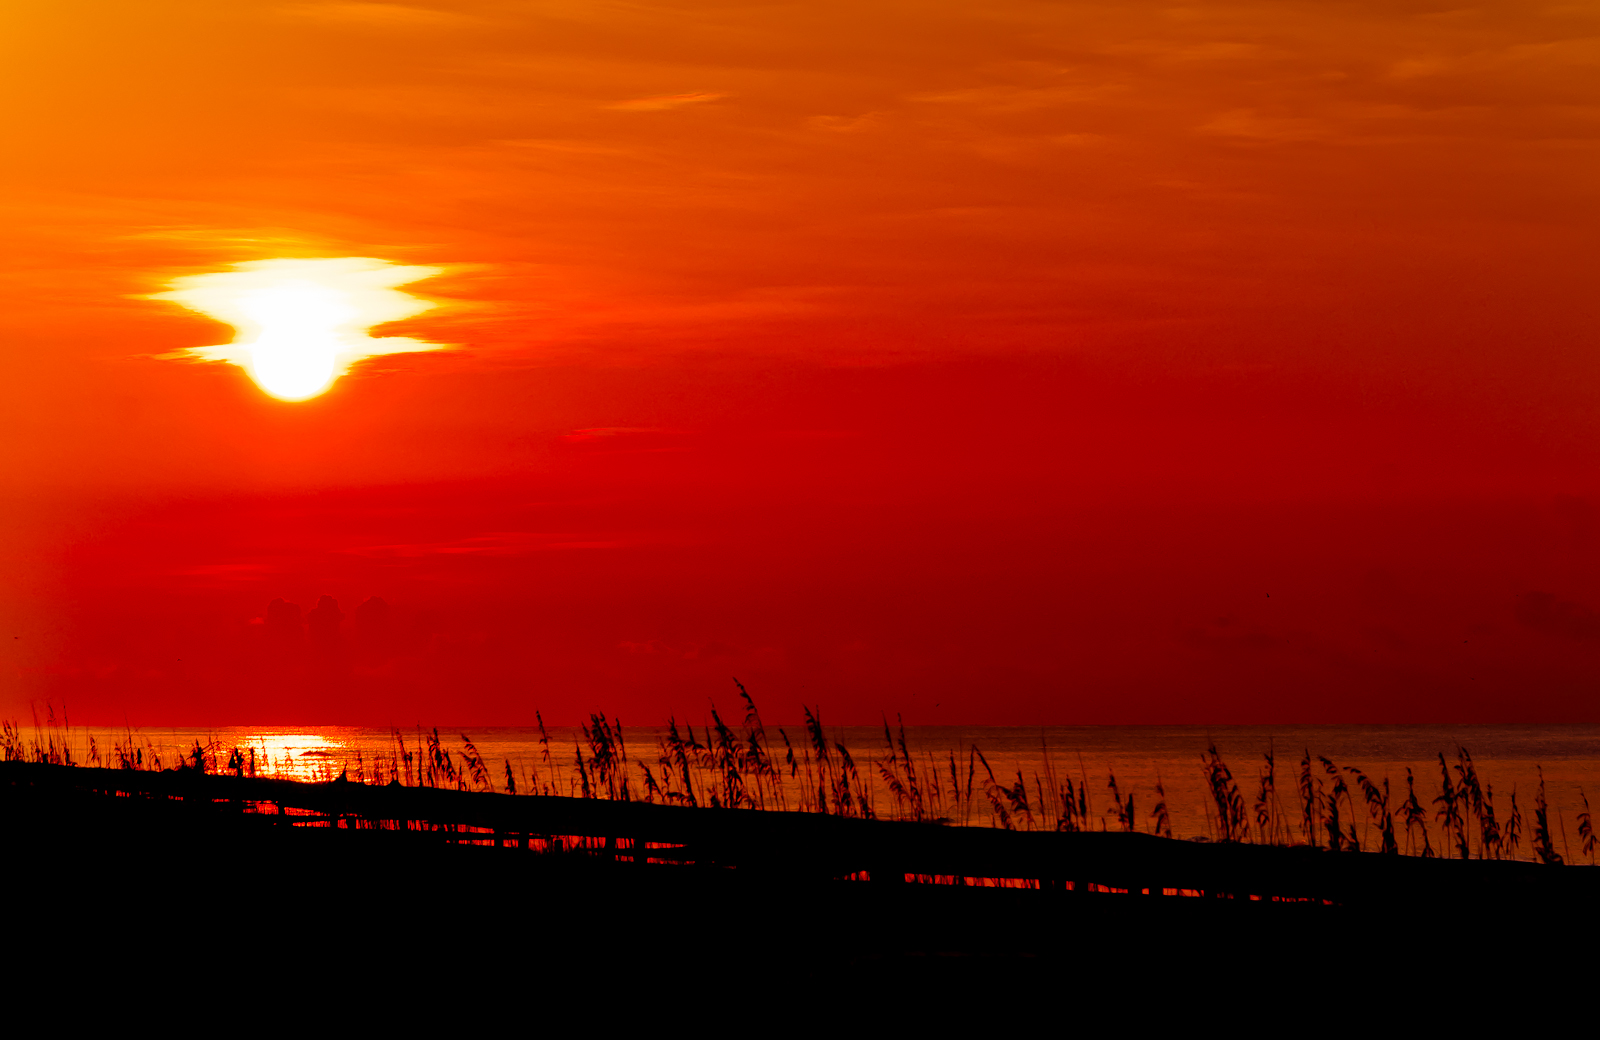 Project 365 [Day 264] Red Sun Rising Over the Gulf of Mexico. This image is part of my ongoing Project 365.